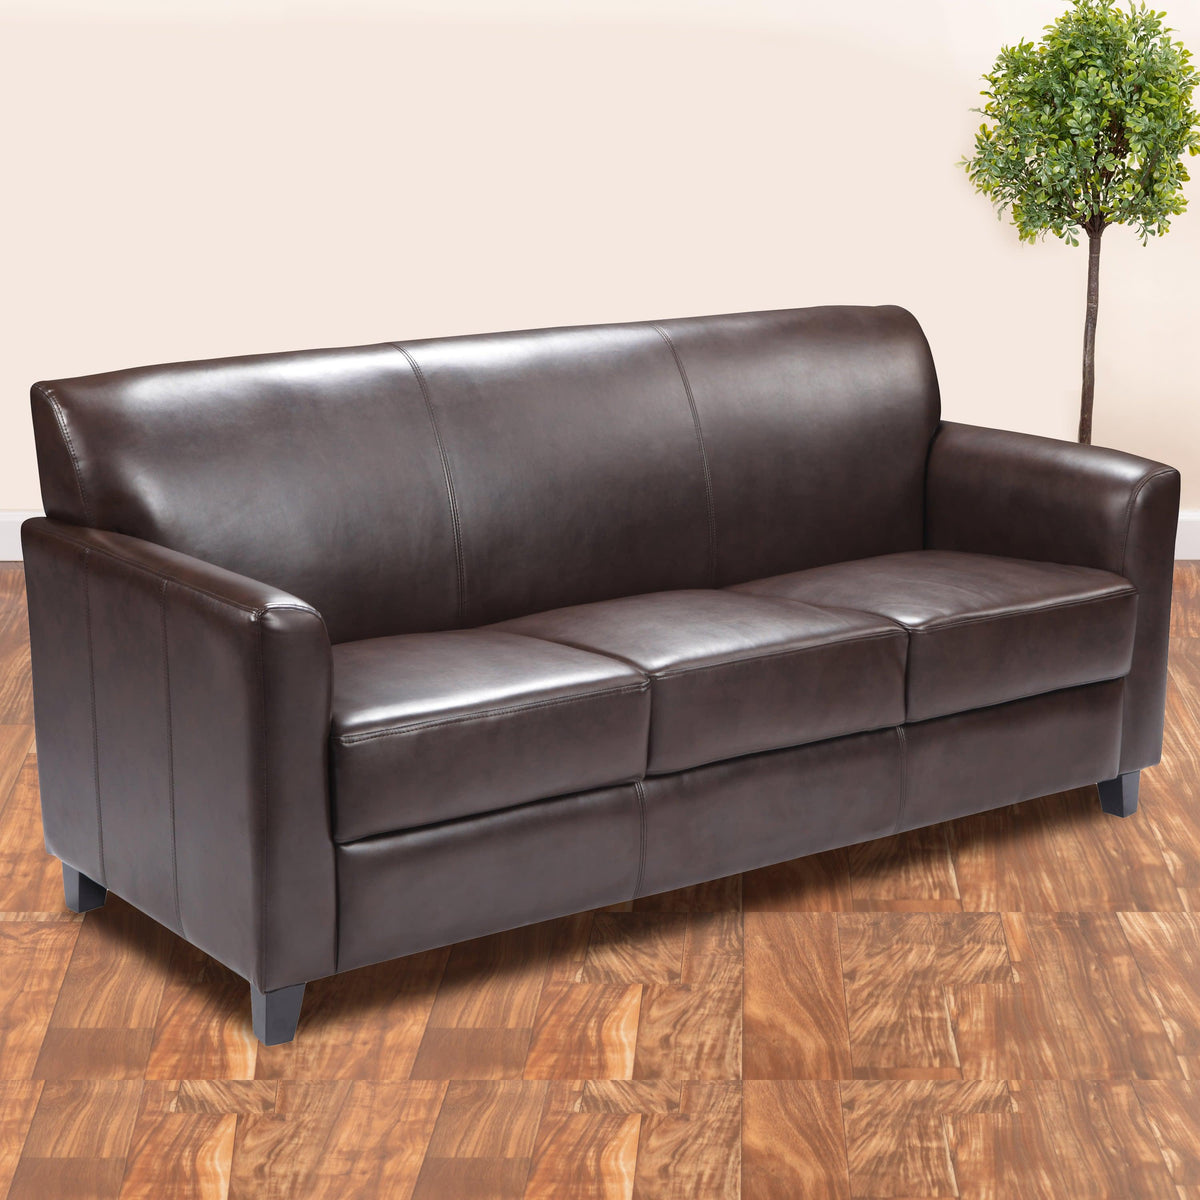 Brown |#| Brown LeatherSoft Sofa with Clean Line Stitched Frame - Reception Seating